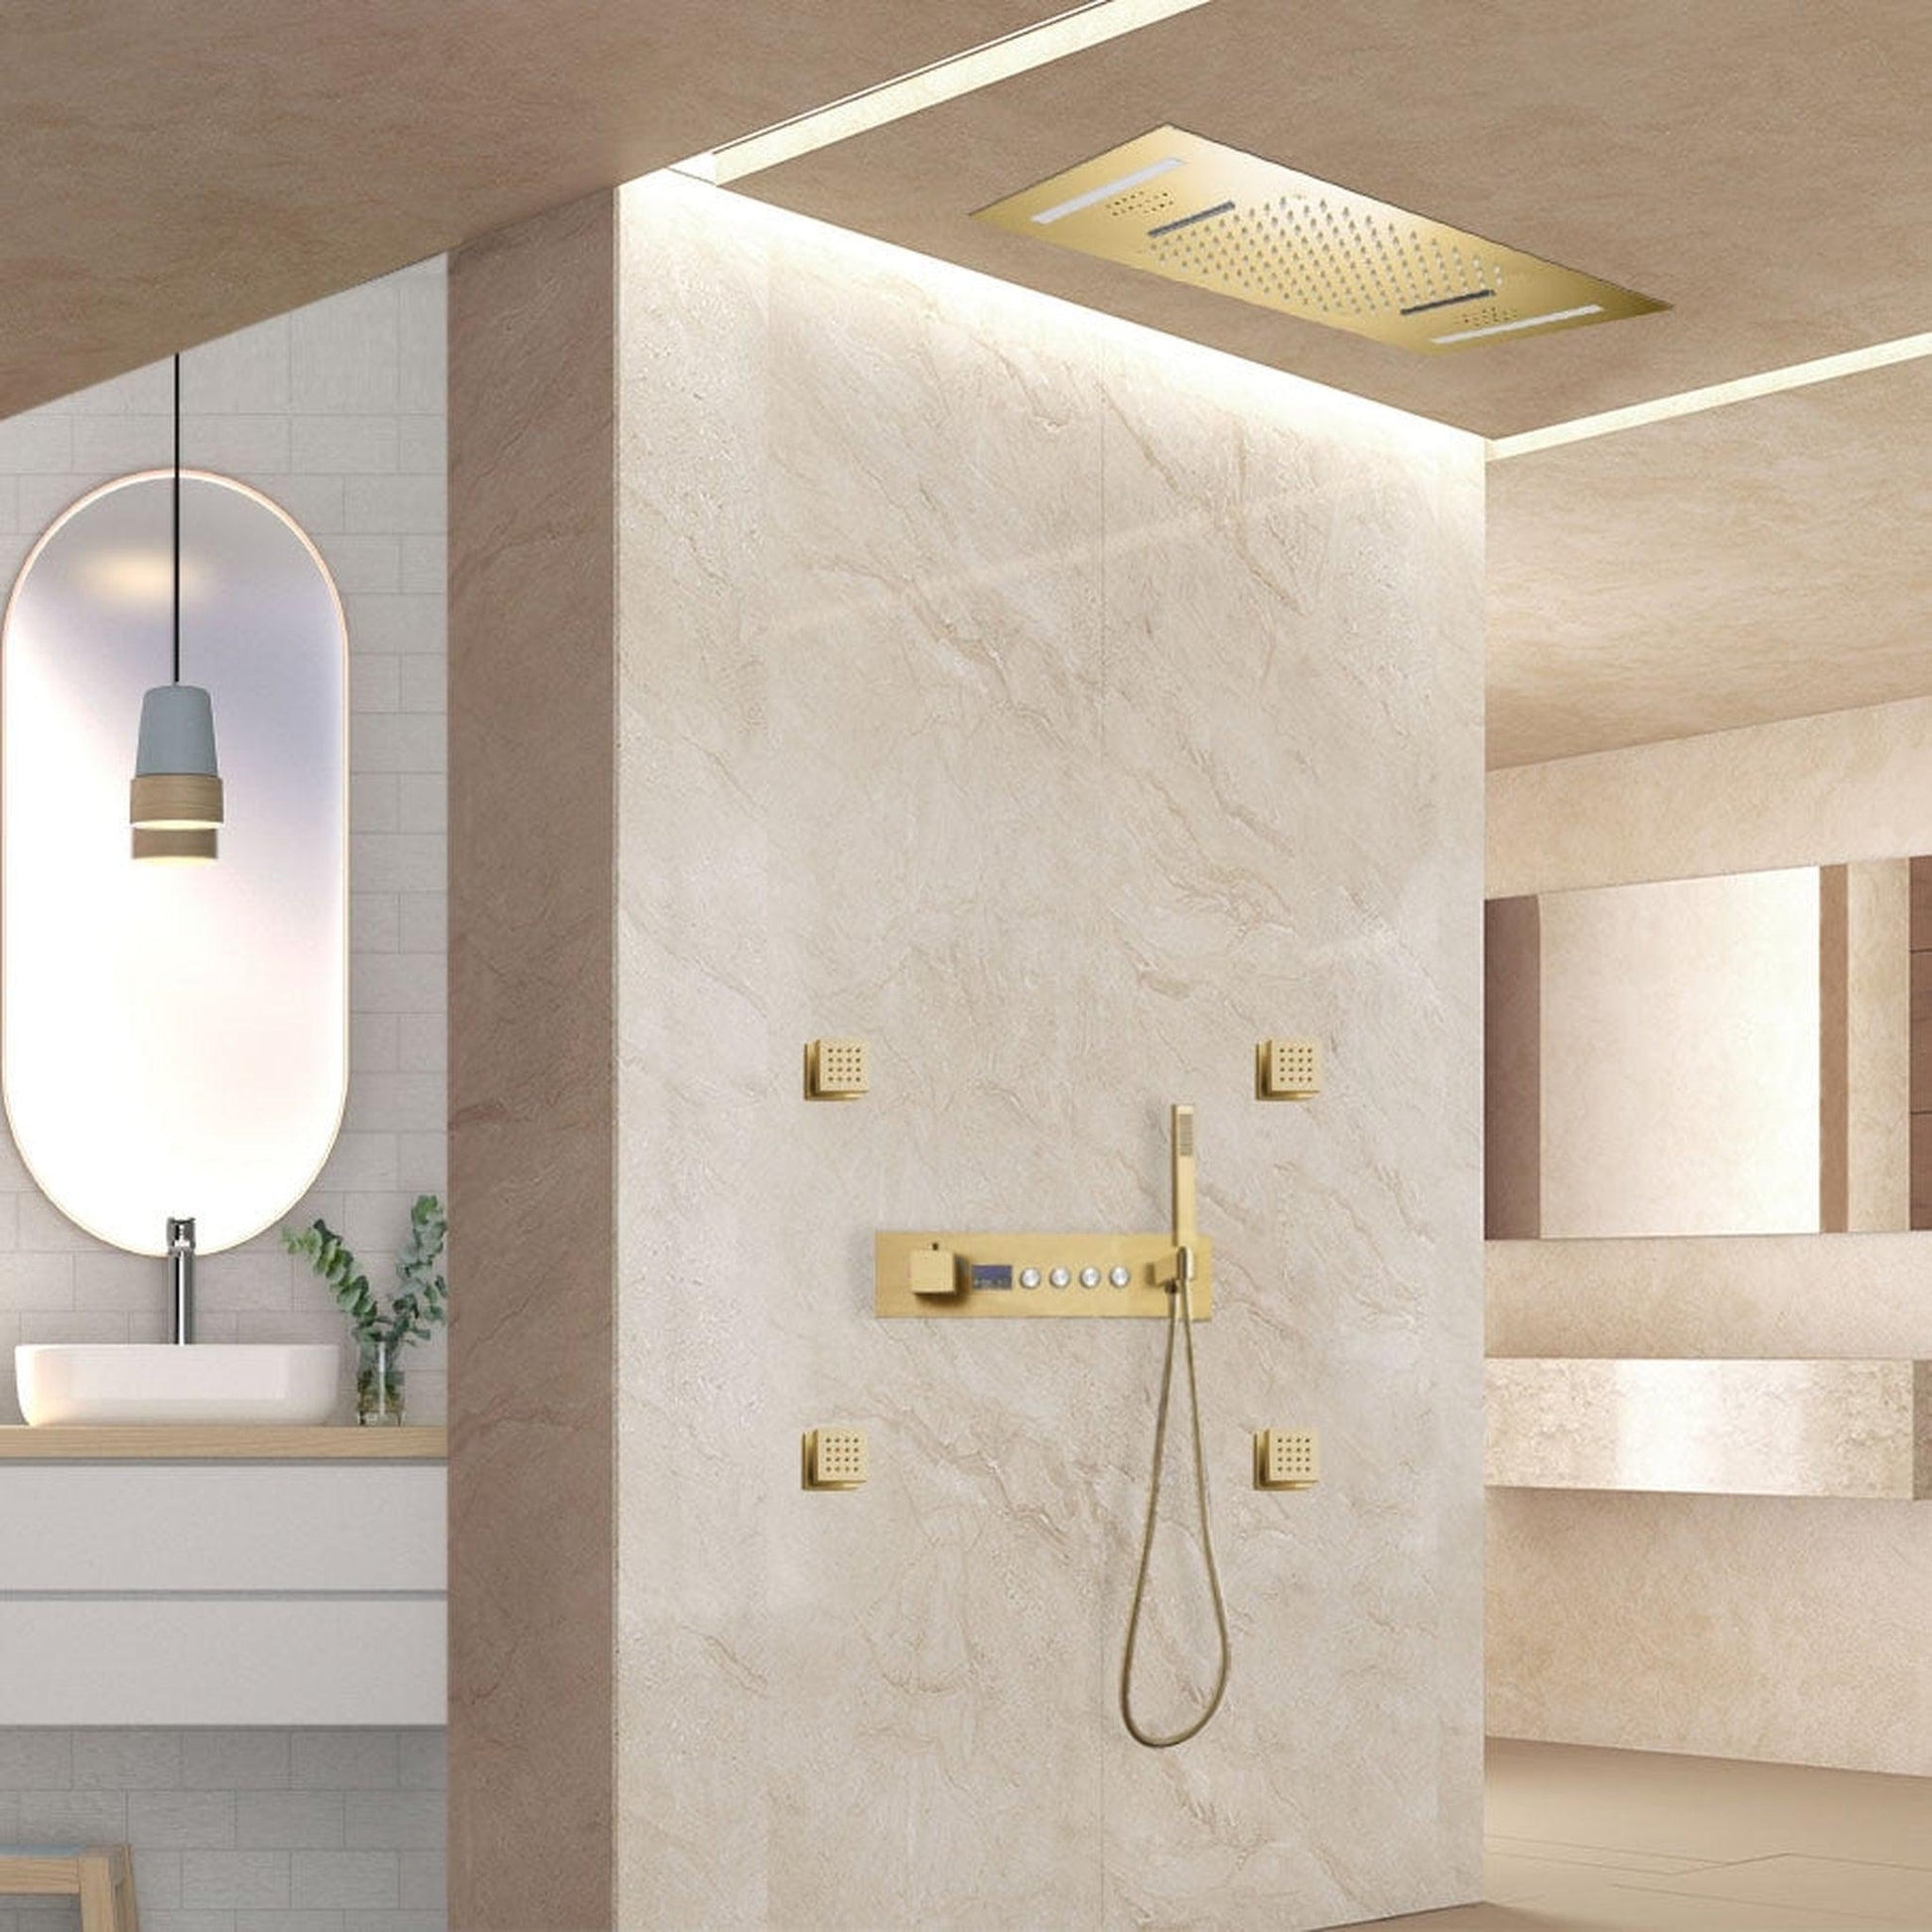 Fontana Piacenza Brushed Gold Recessed Ceiling Mounted Thermostatic LED Waterfall Rainfall Shower System With 4-Jet Body Sprays and Hand Shower